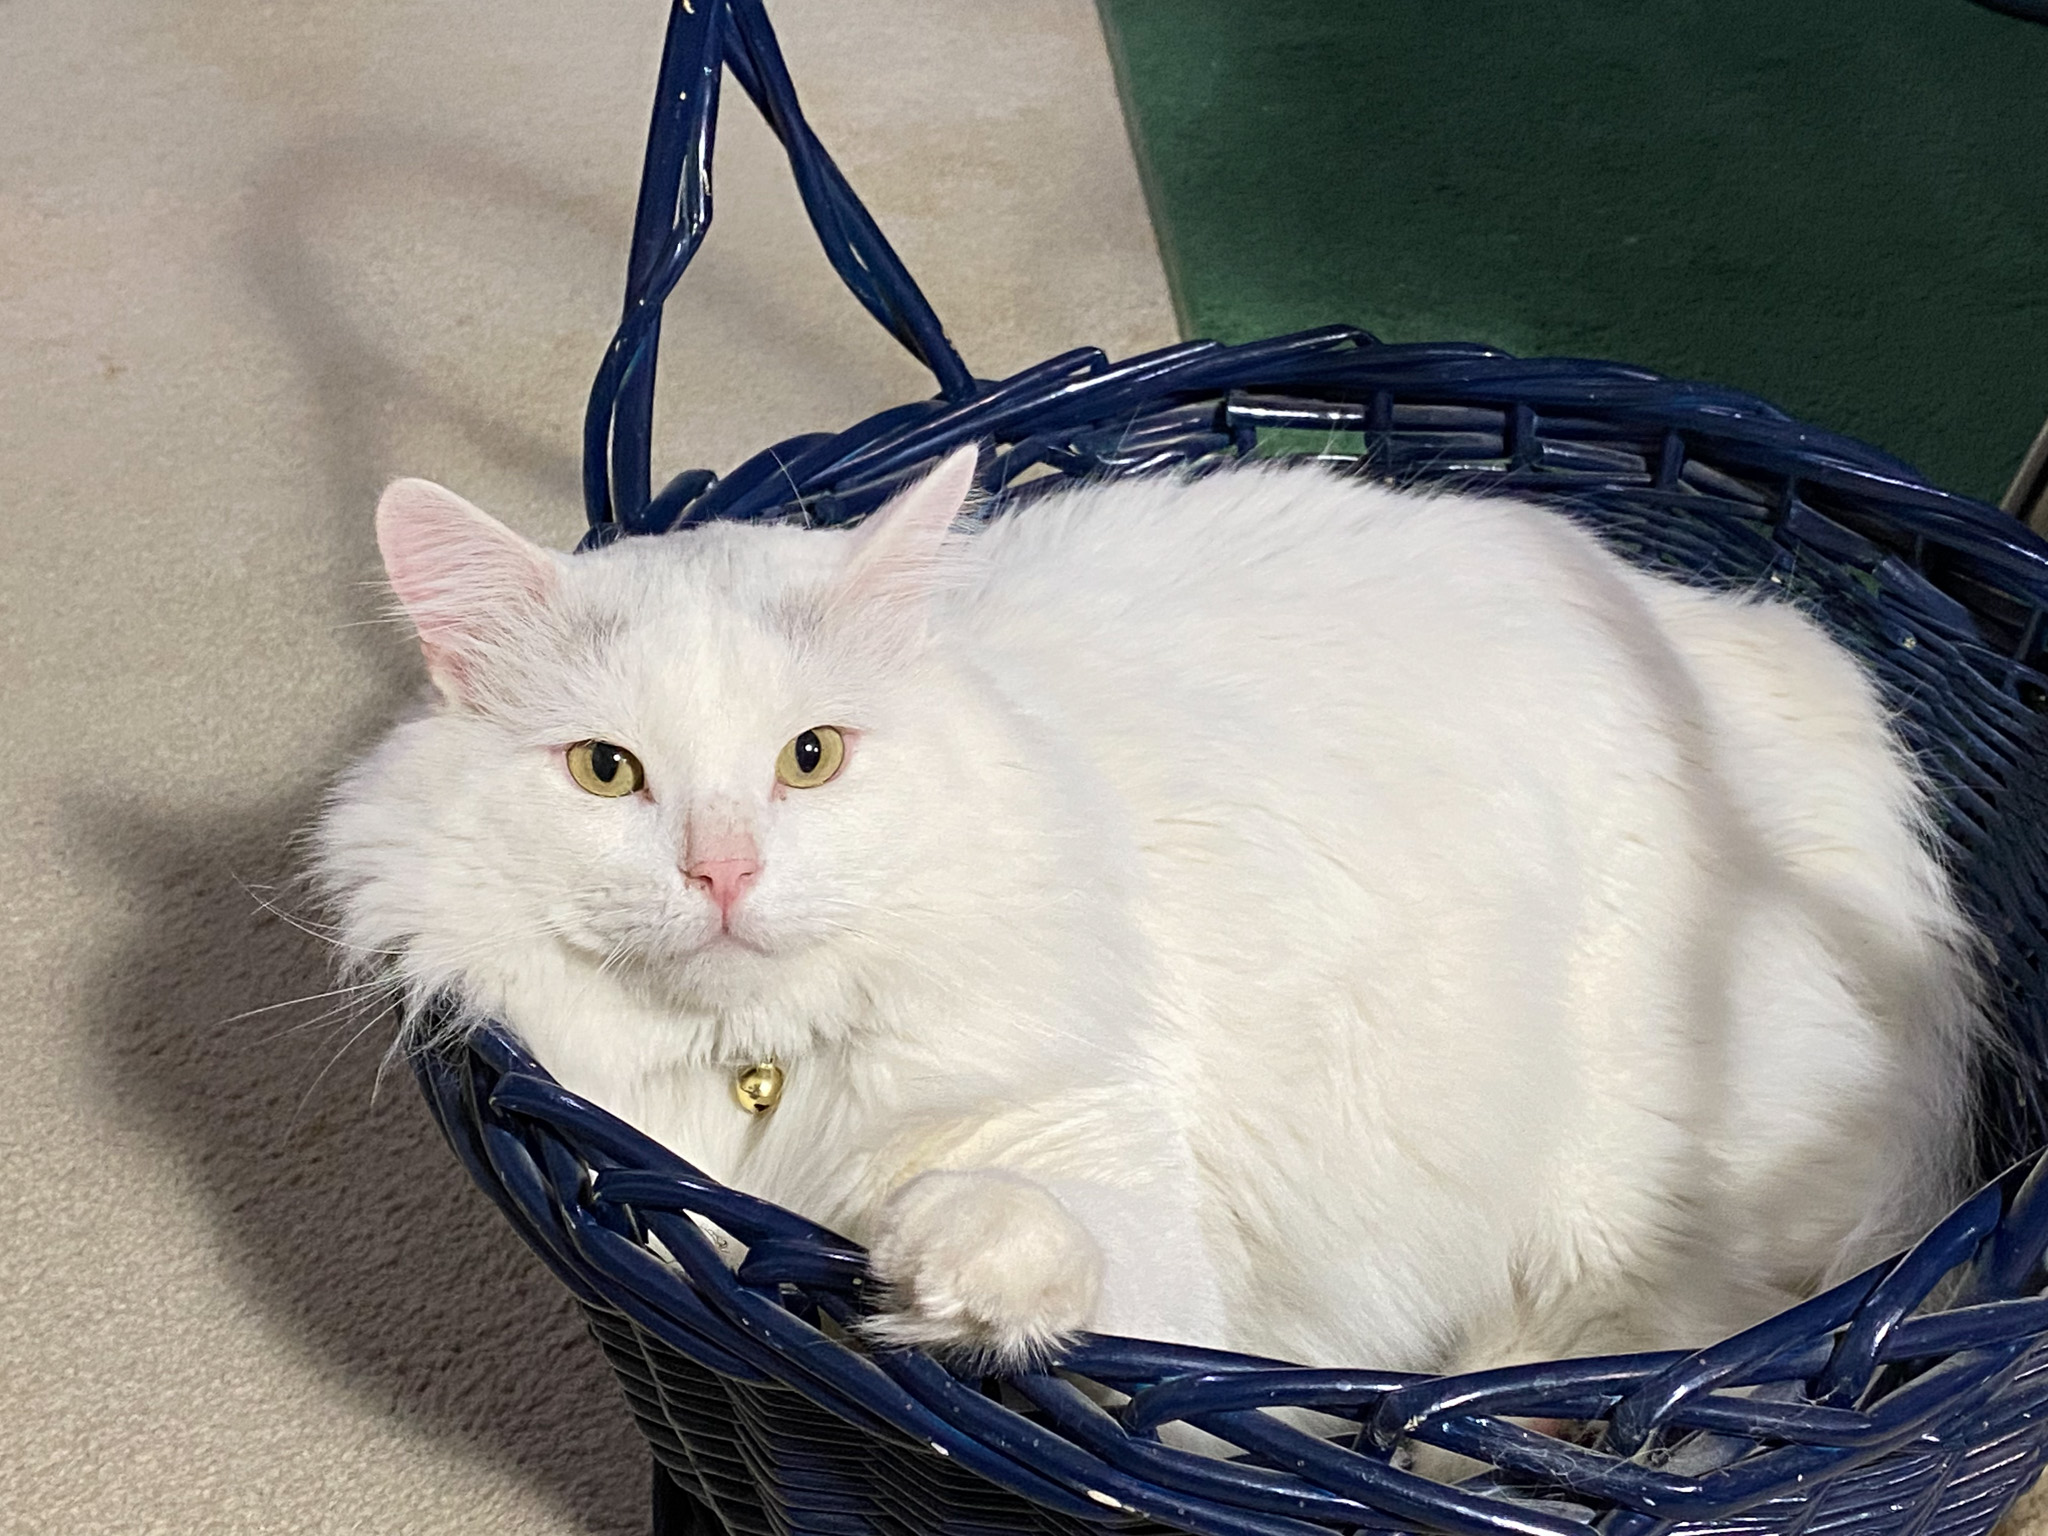 Aiko in a basket